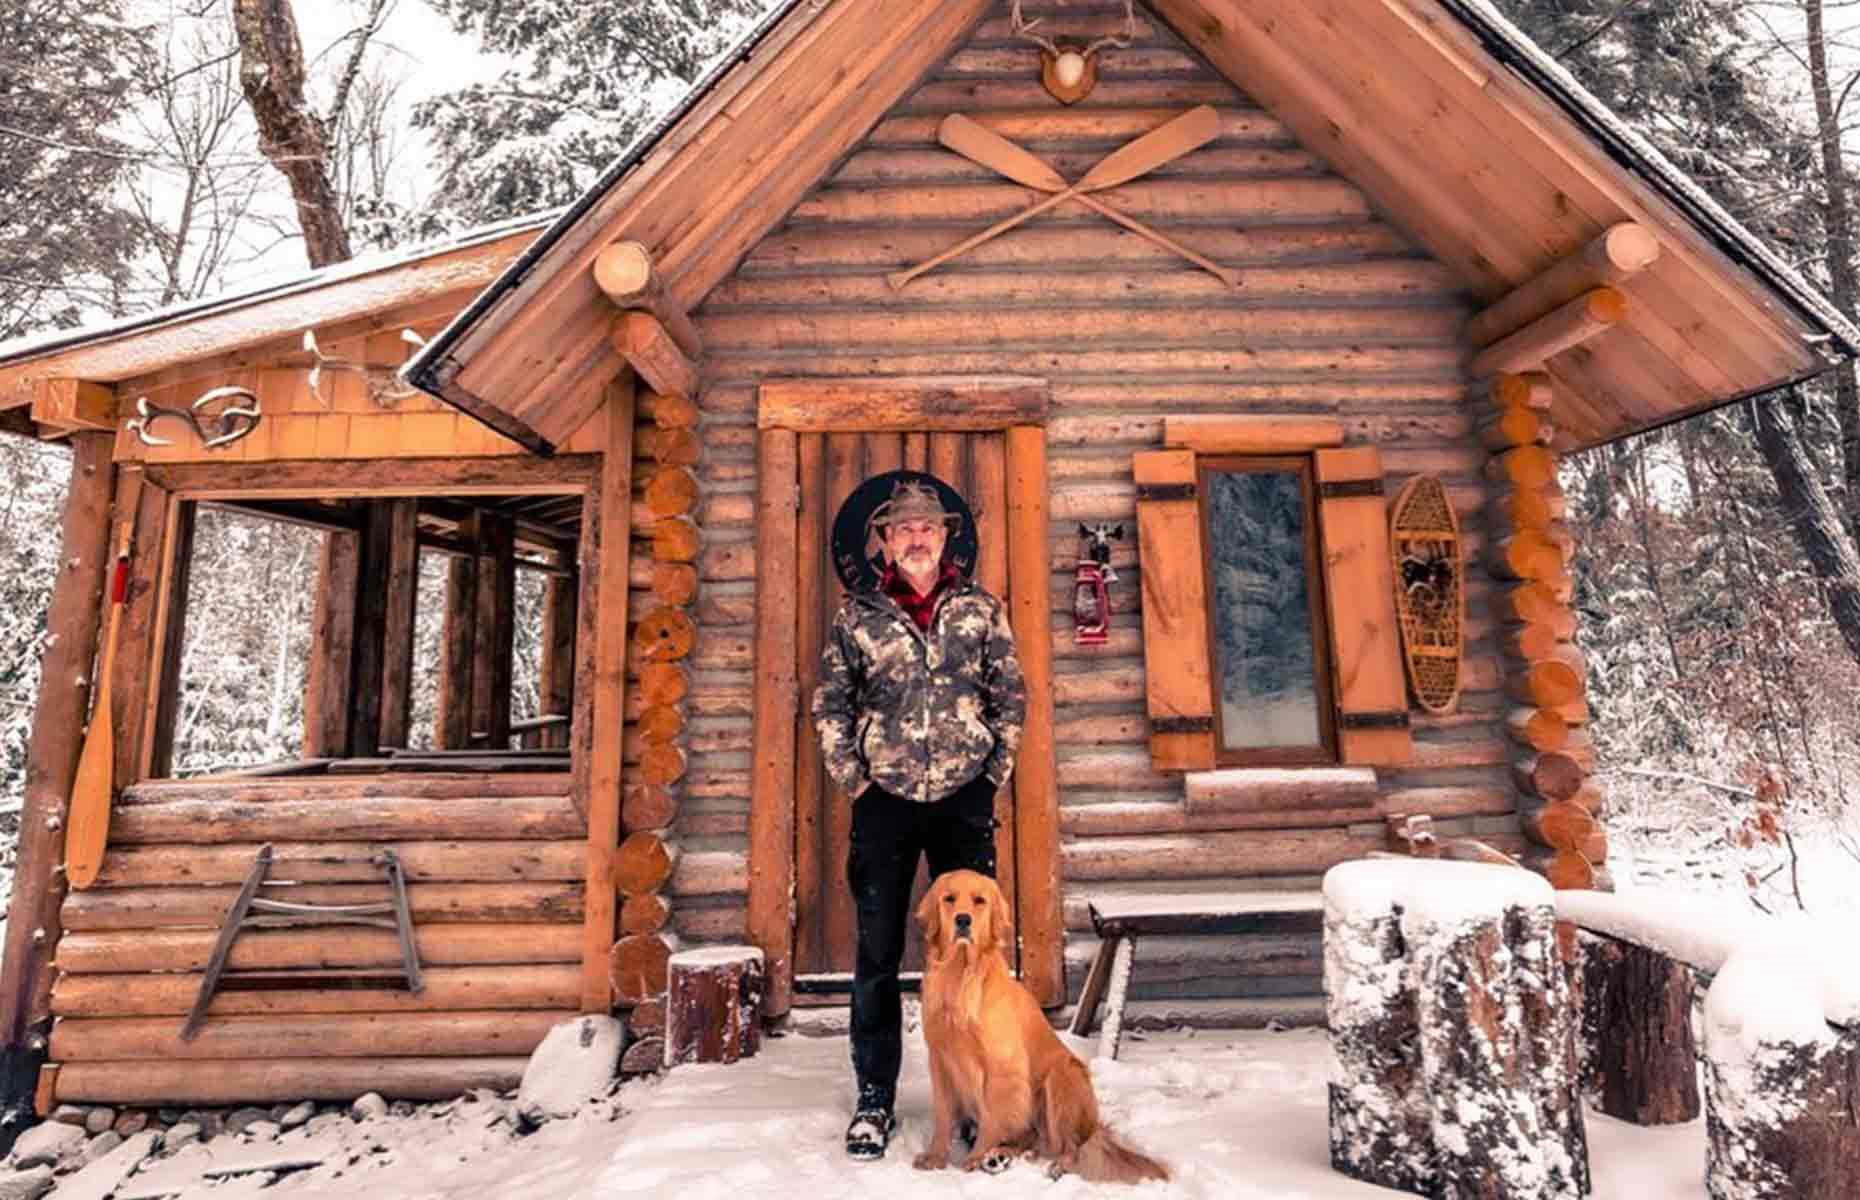 <p>Living out in the woods may seem idyllic, but the realities of everyday life are no walk in the park. Chopping wood, building fires and searching for food are all part of a daily routine, no matter the weather.</p>  <p>Shawn has his furry pal, Cali, to keep him company in his snowy outdoor endeavours and she features regularly in his video updates.</p>  <p><strong>Liked this? Click on the Follow button above for more great stories from loveEXPLORING</strong></p>  <p><strong>Loved this? <a href="https://www.loveproperty.com/campaigns/95546/off-grid-living">Discover more incredible off-grid homes</a></strong></p>